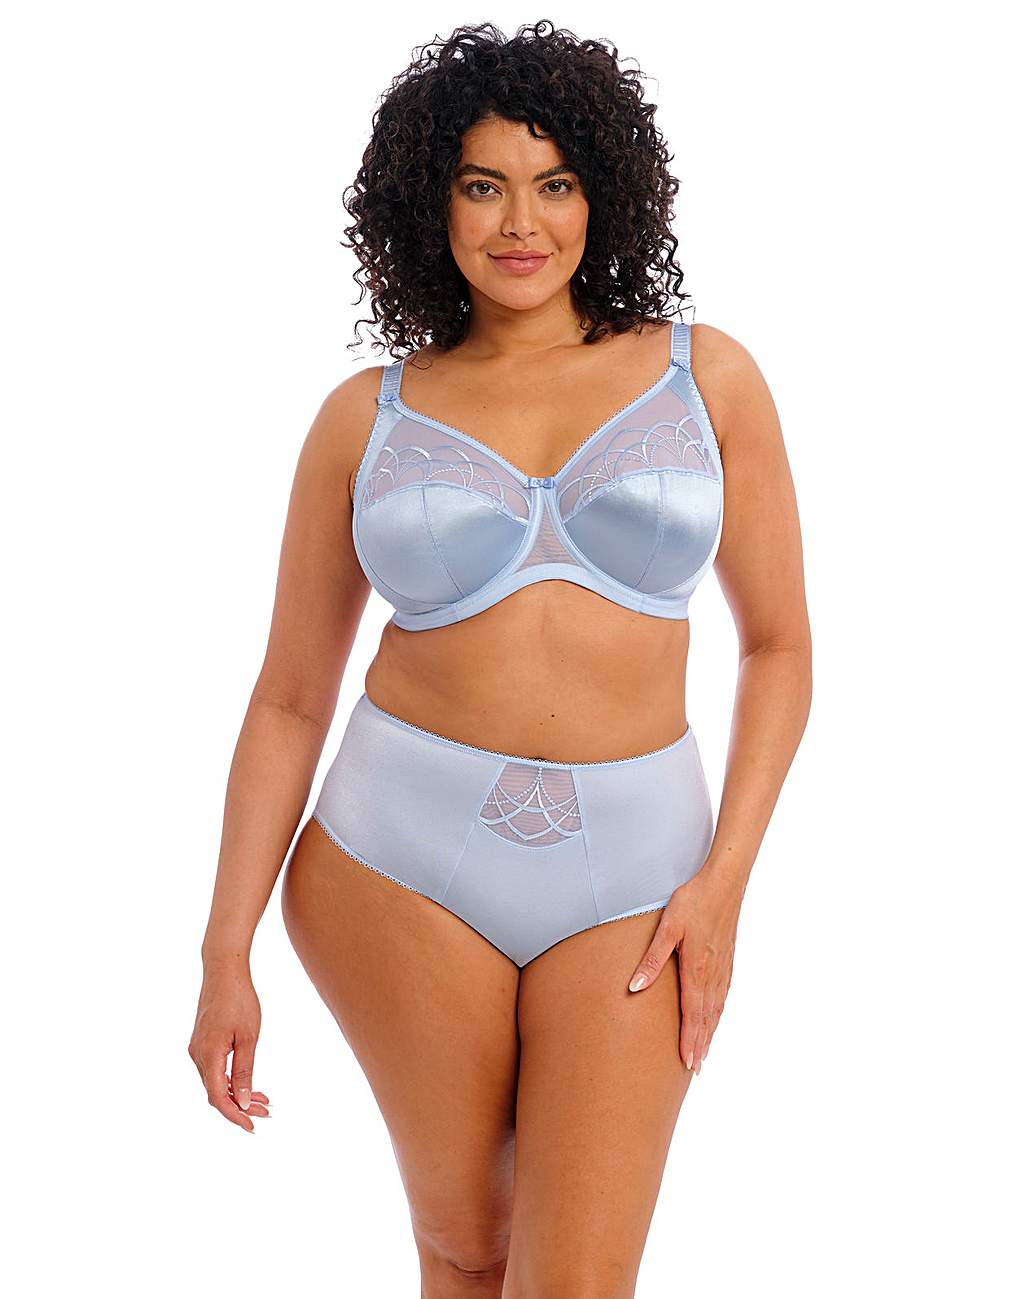 Elomi Cate Underwire 3-Section Cup Bra 4030 - Elomi 